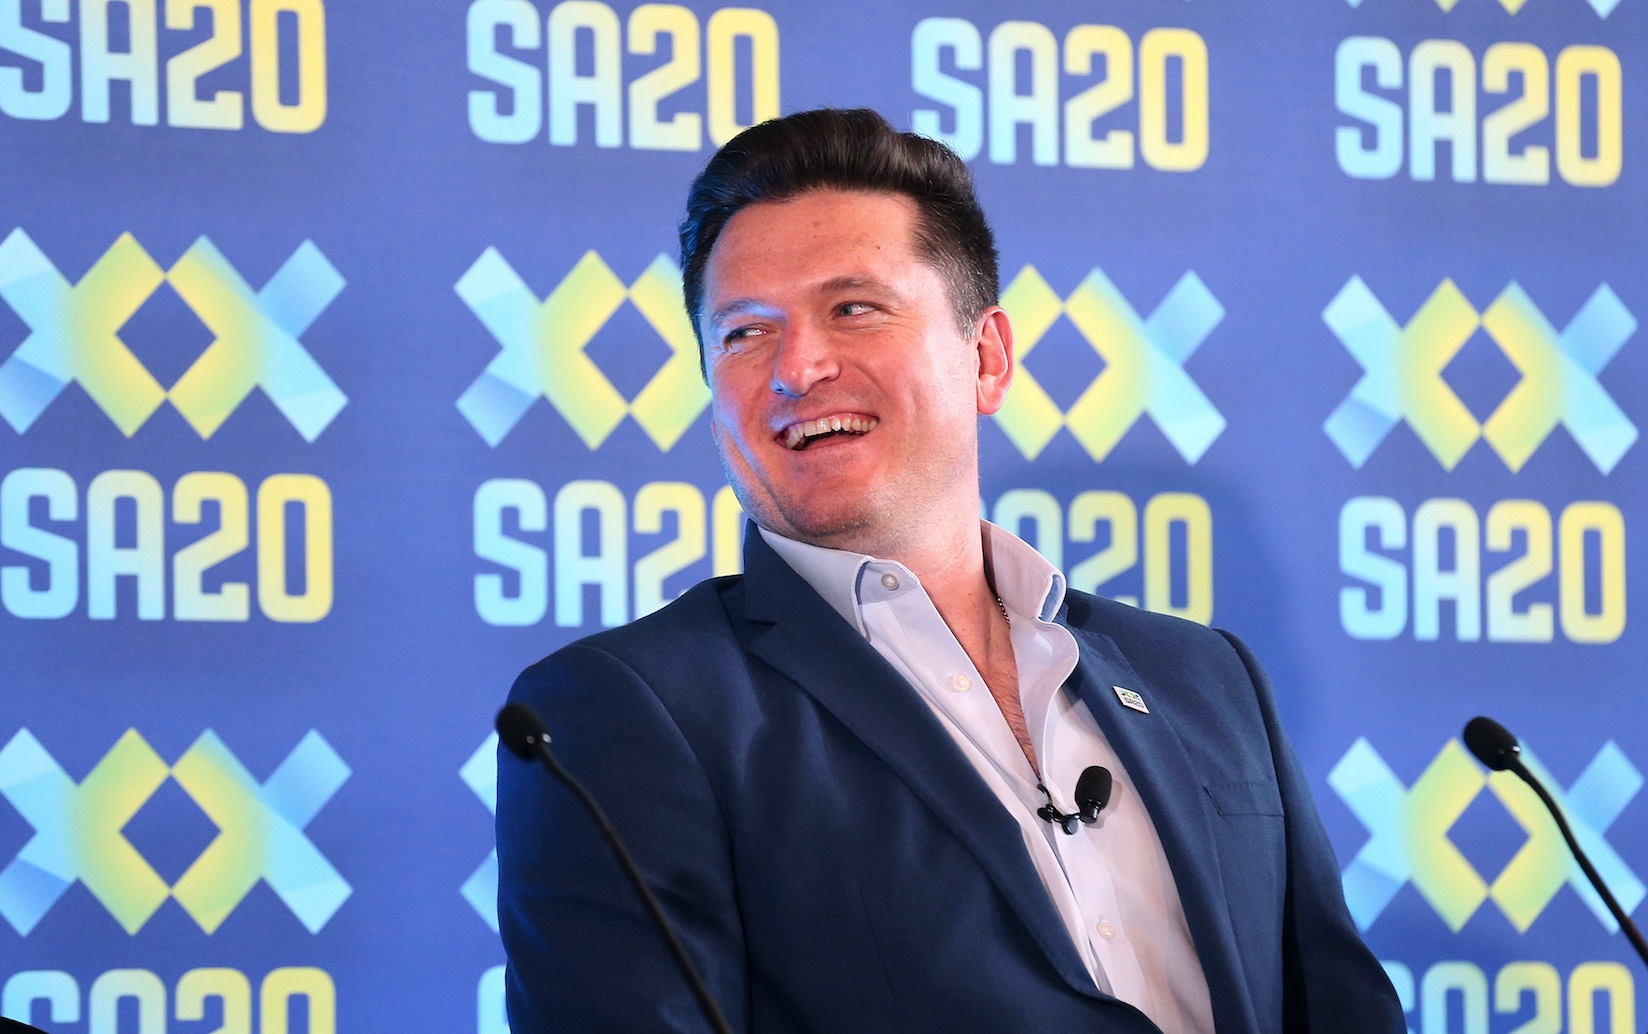 Graeme Smith Reveals His Aspirations For SA20 League’s Growth, Says ‘Our Ambition Is To Be The Biggest League Outside India’